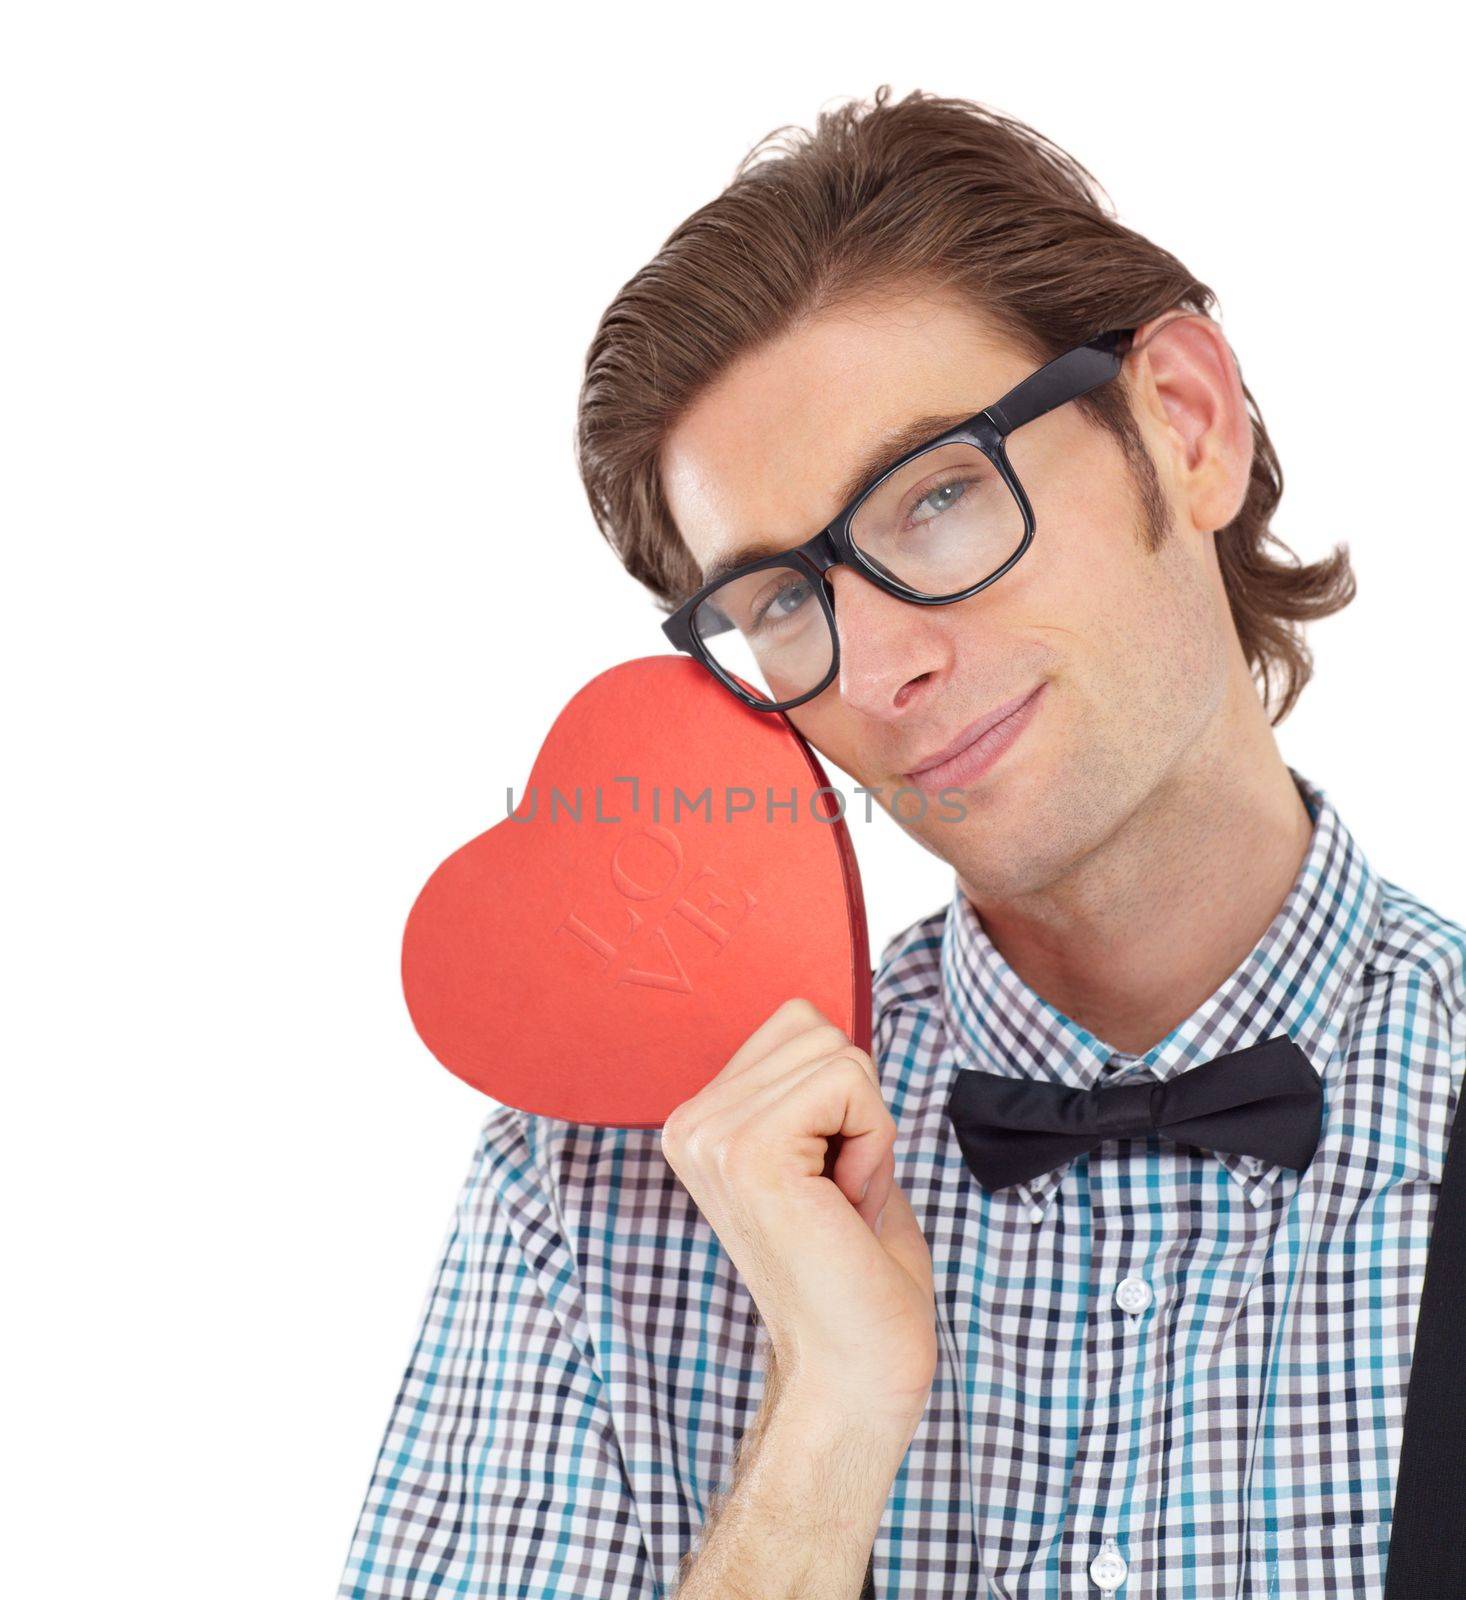 Love, nerd and portrait of man with heart emoji or icon for romance and valentines day isolated on white background. Smile, happy geek and valentine shape surprise with glasses and bow tie in studio